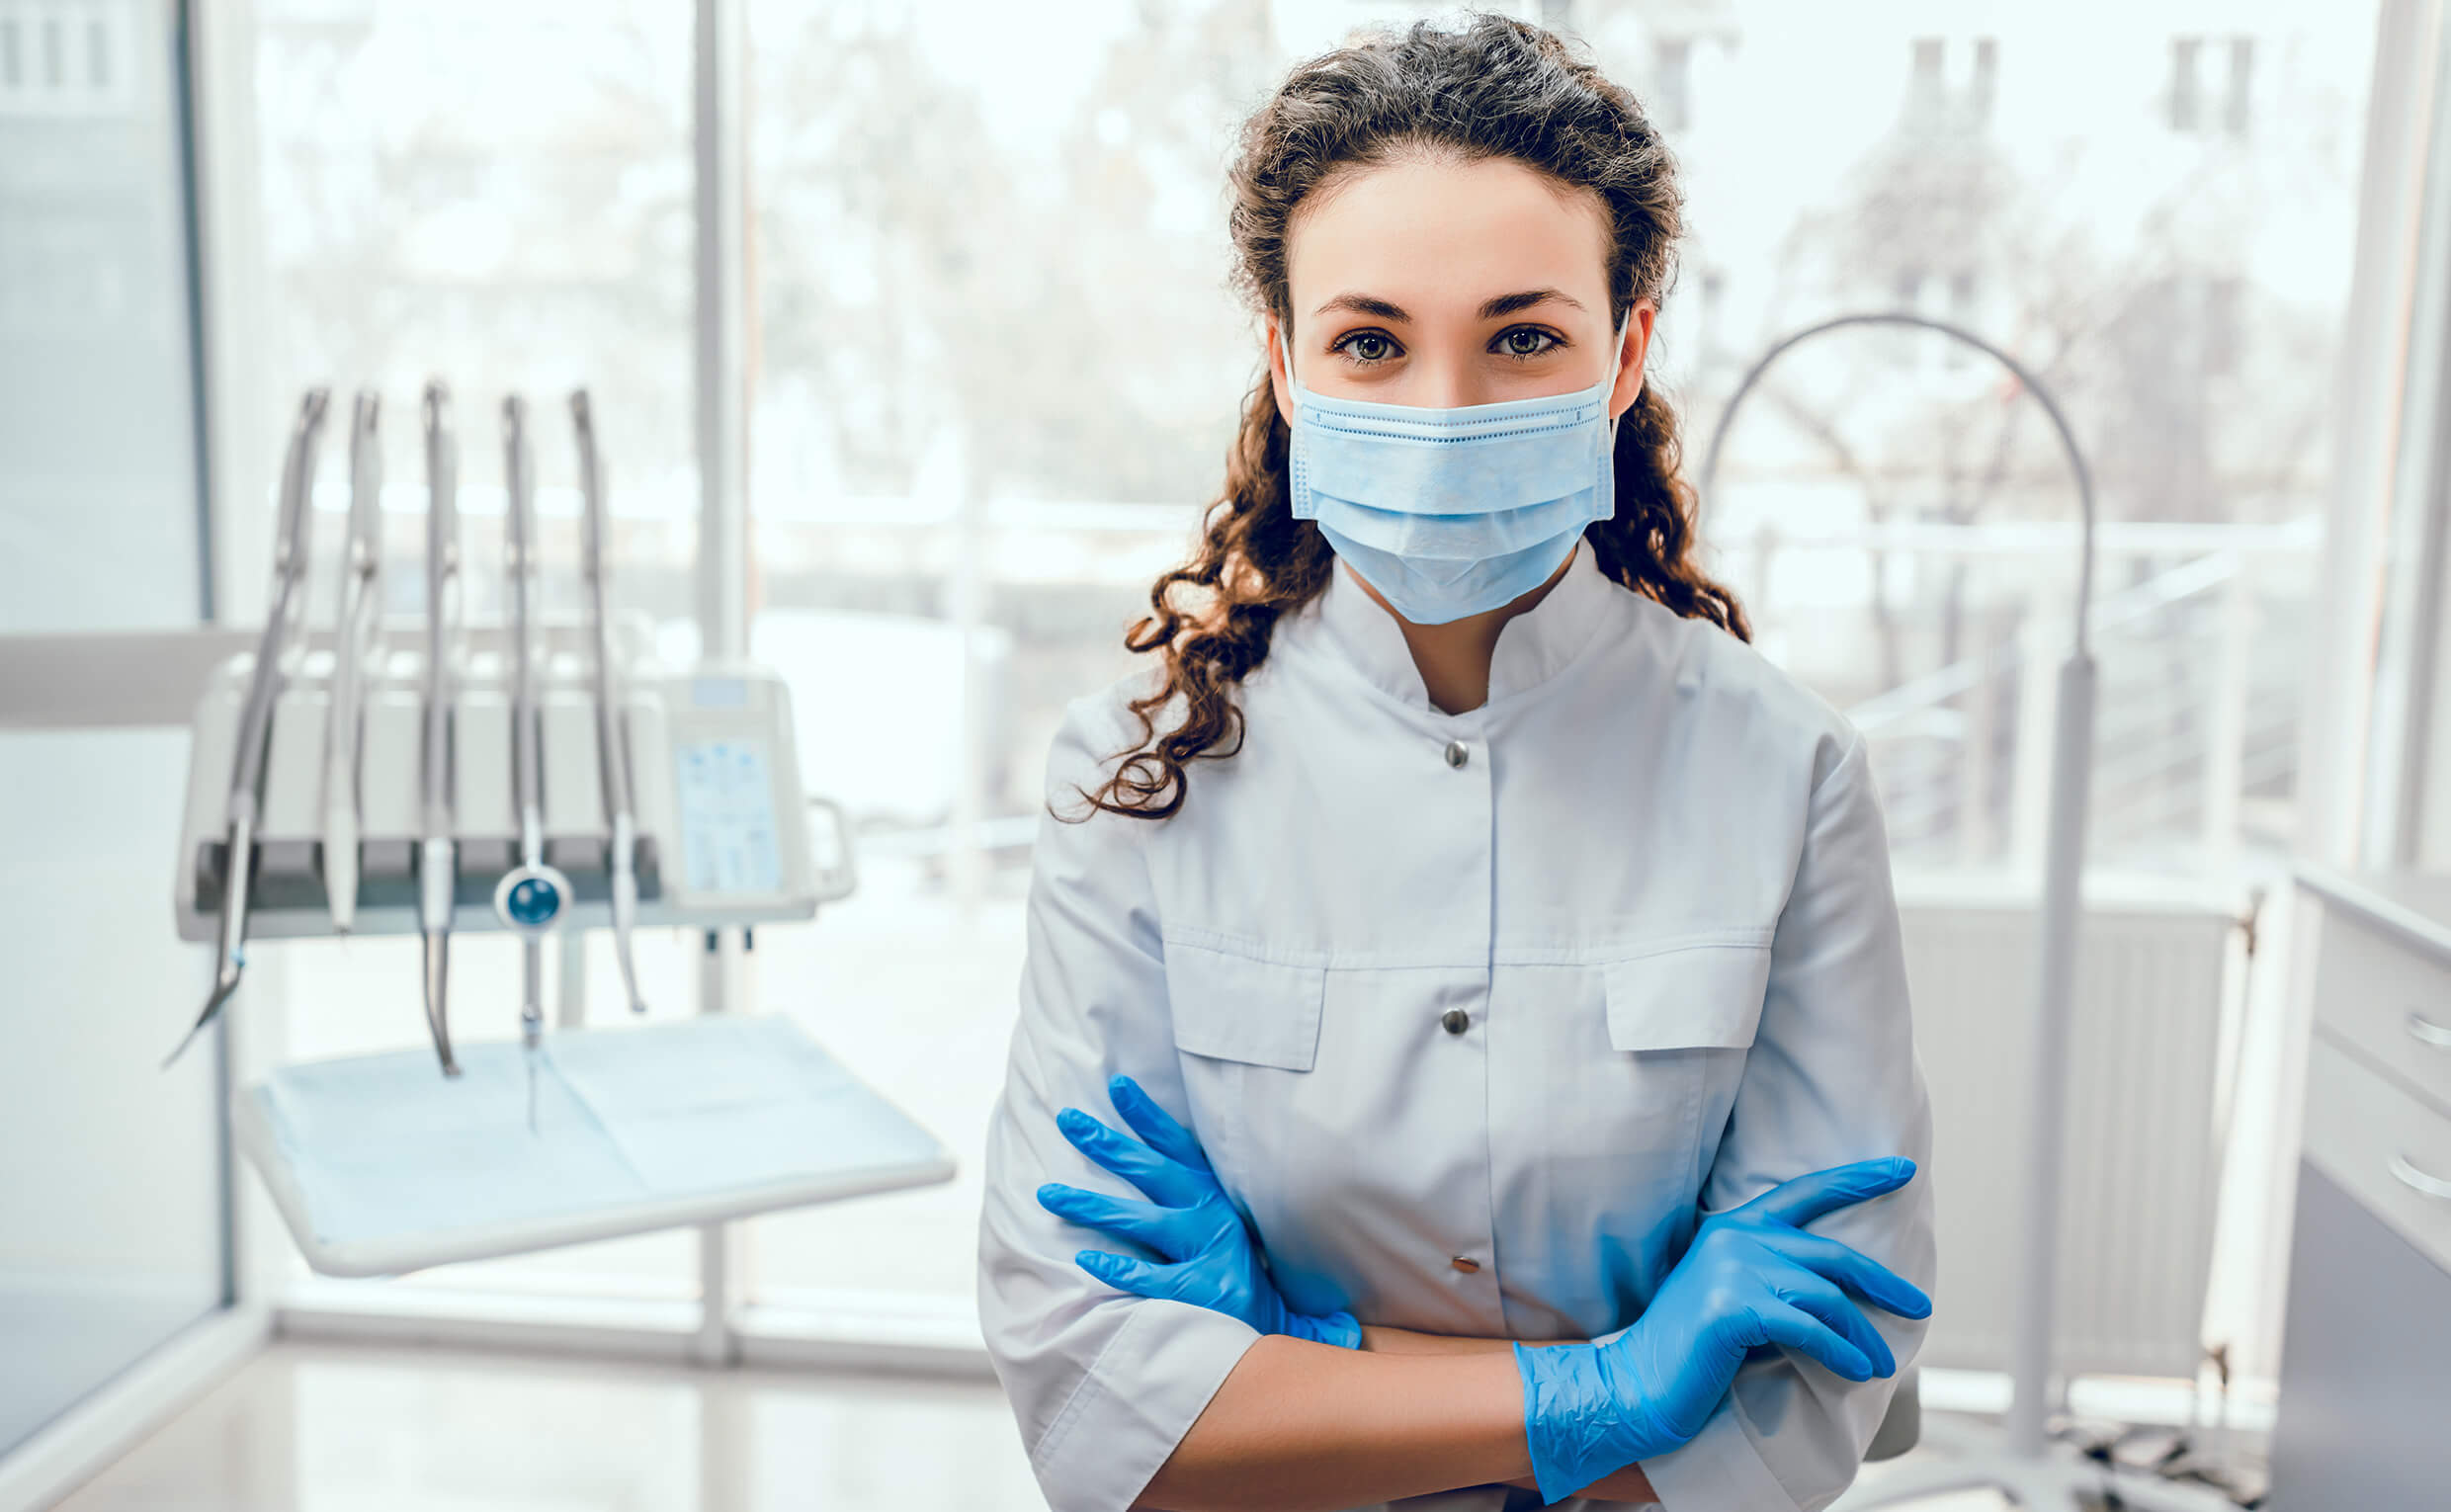 3 Lessons My Patients Taught Me: A Hygienist’s Perspective